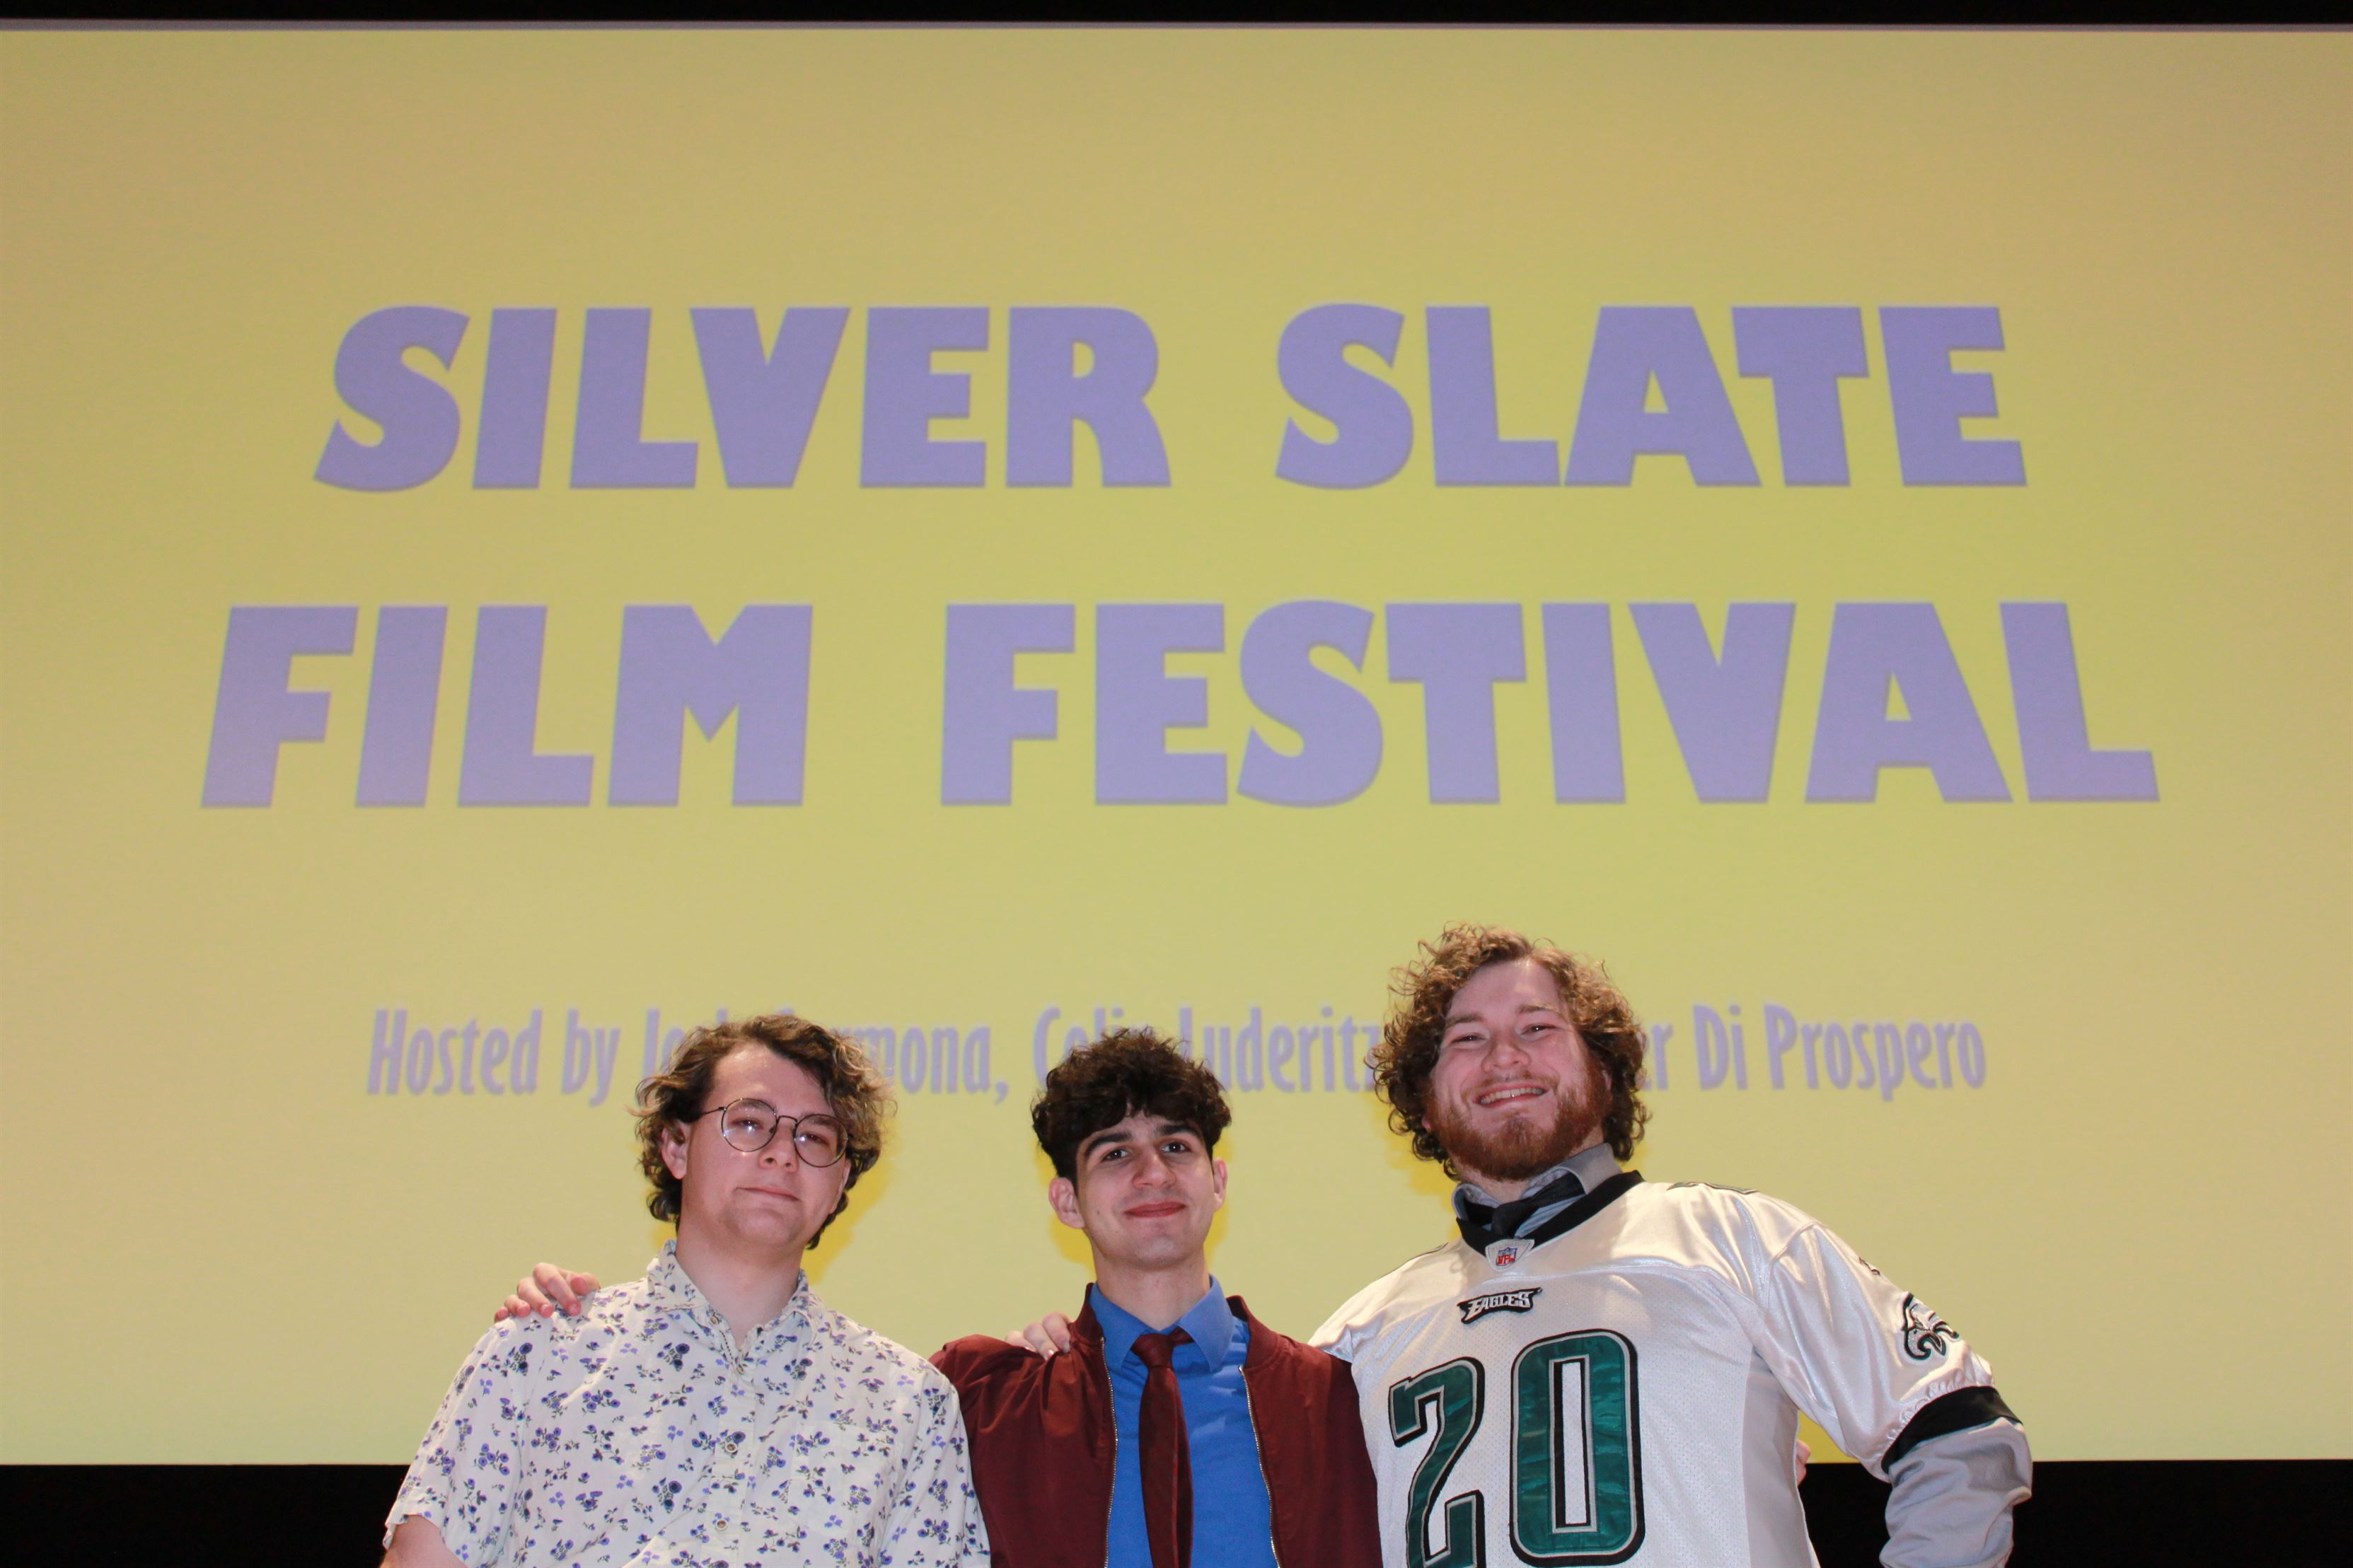 Hosts (left to right) Josh Carmona, Peter Di Prospero and Colin Luderitz did a great job putting on the festival with their charismatic personalities and appreciation of student film.